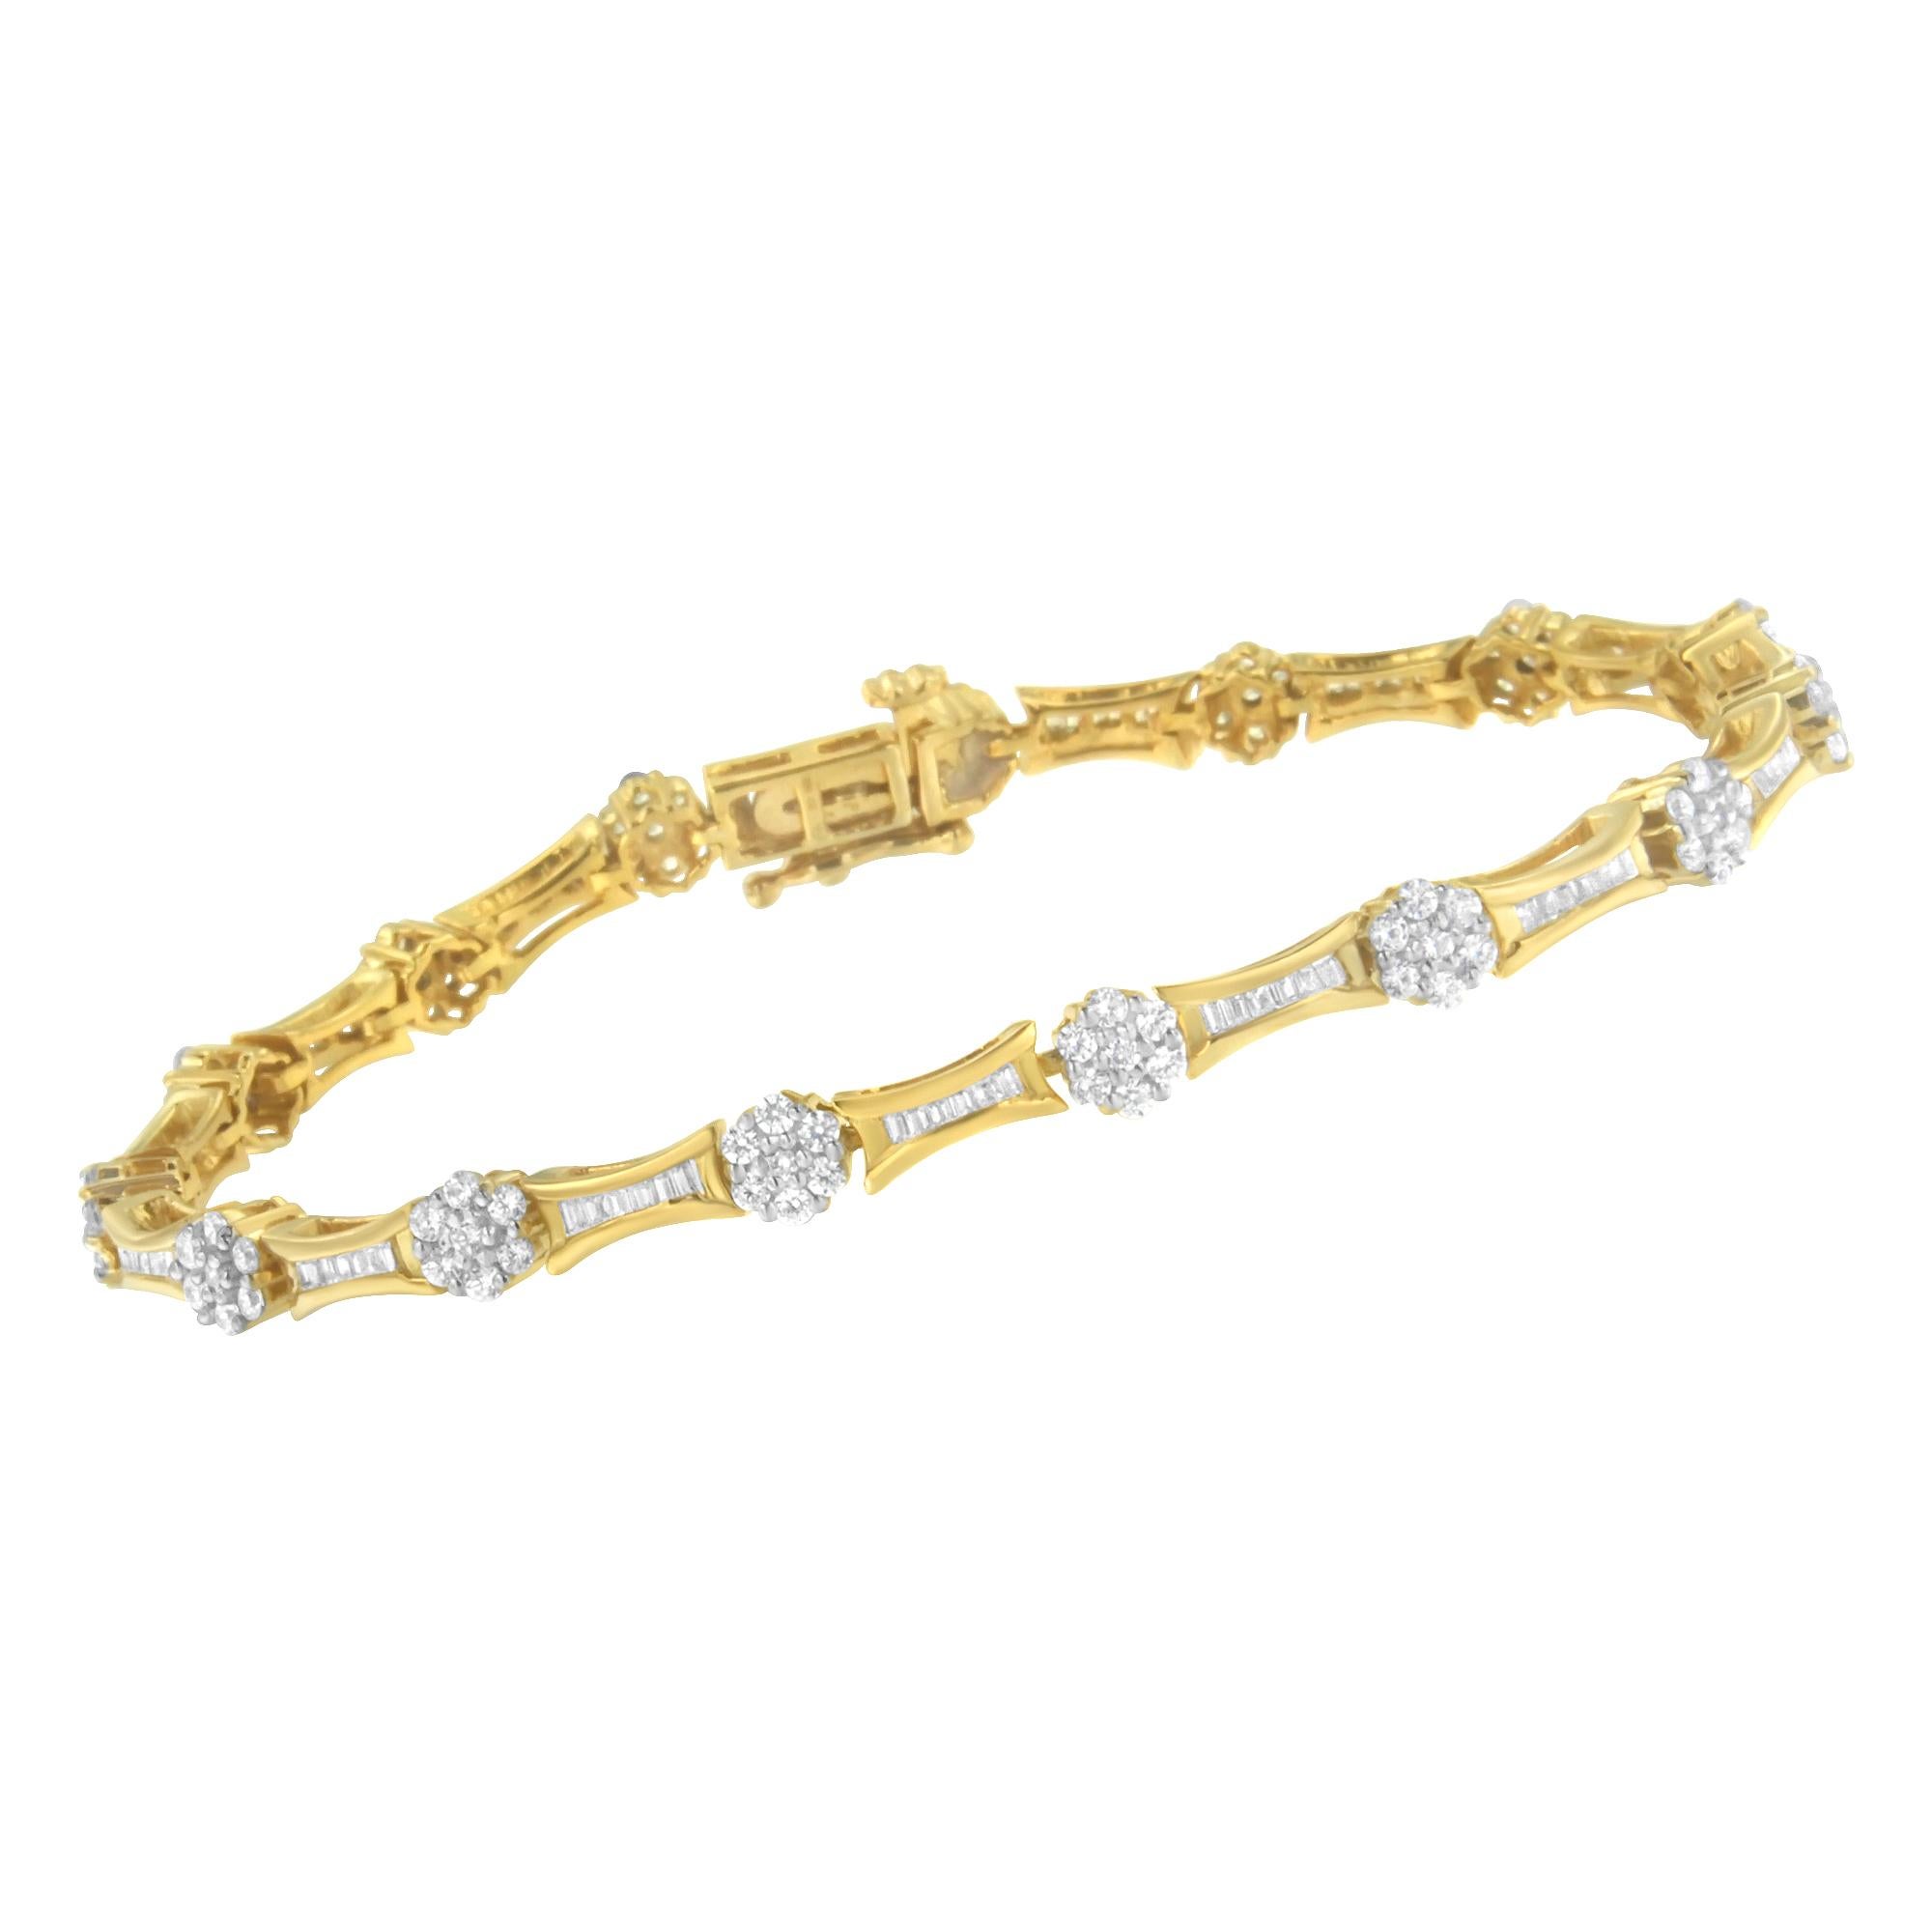 Contemporary 10K Yellow and White Gold 2.0 Carat Round and Baguette-Cut Diamond Link Bracelet For Sale